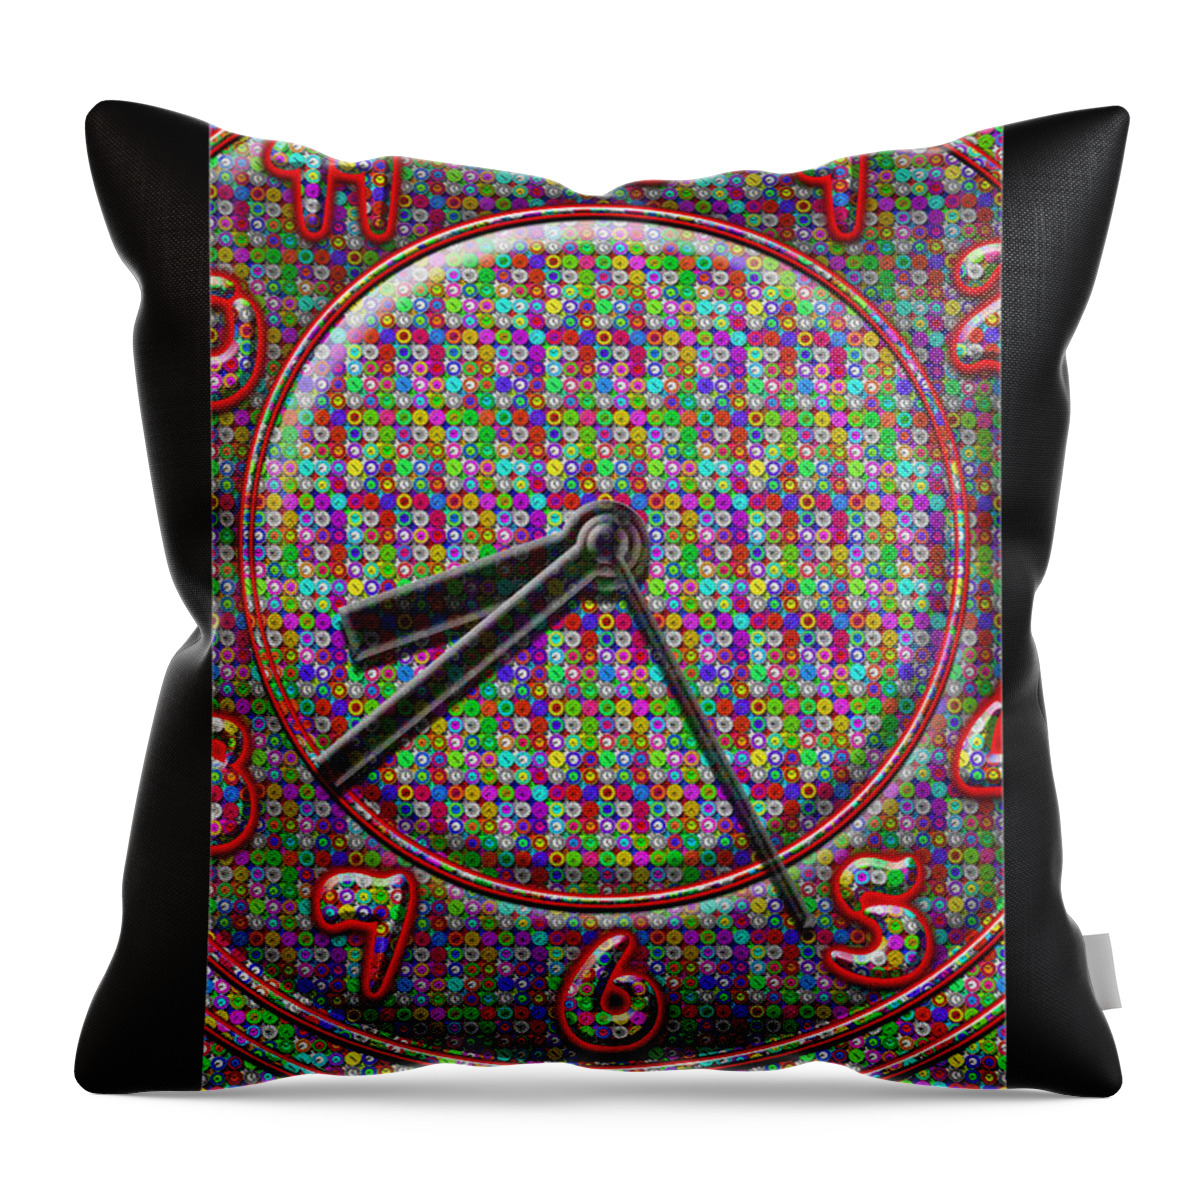 Time Throw Pillow featuring the digital art Faces Of Time 2 by Mike McGlothlen